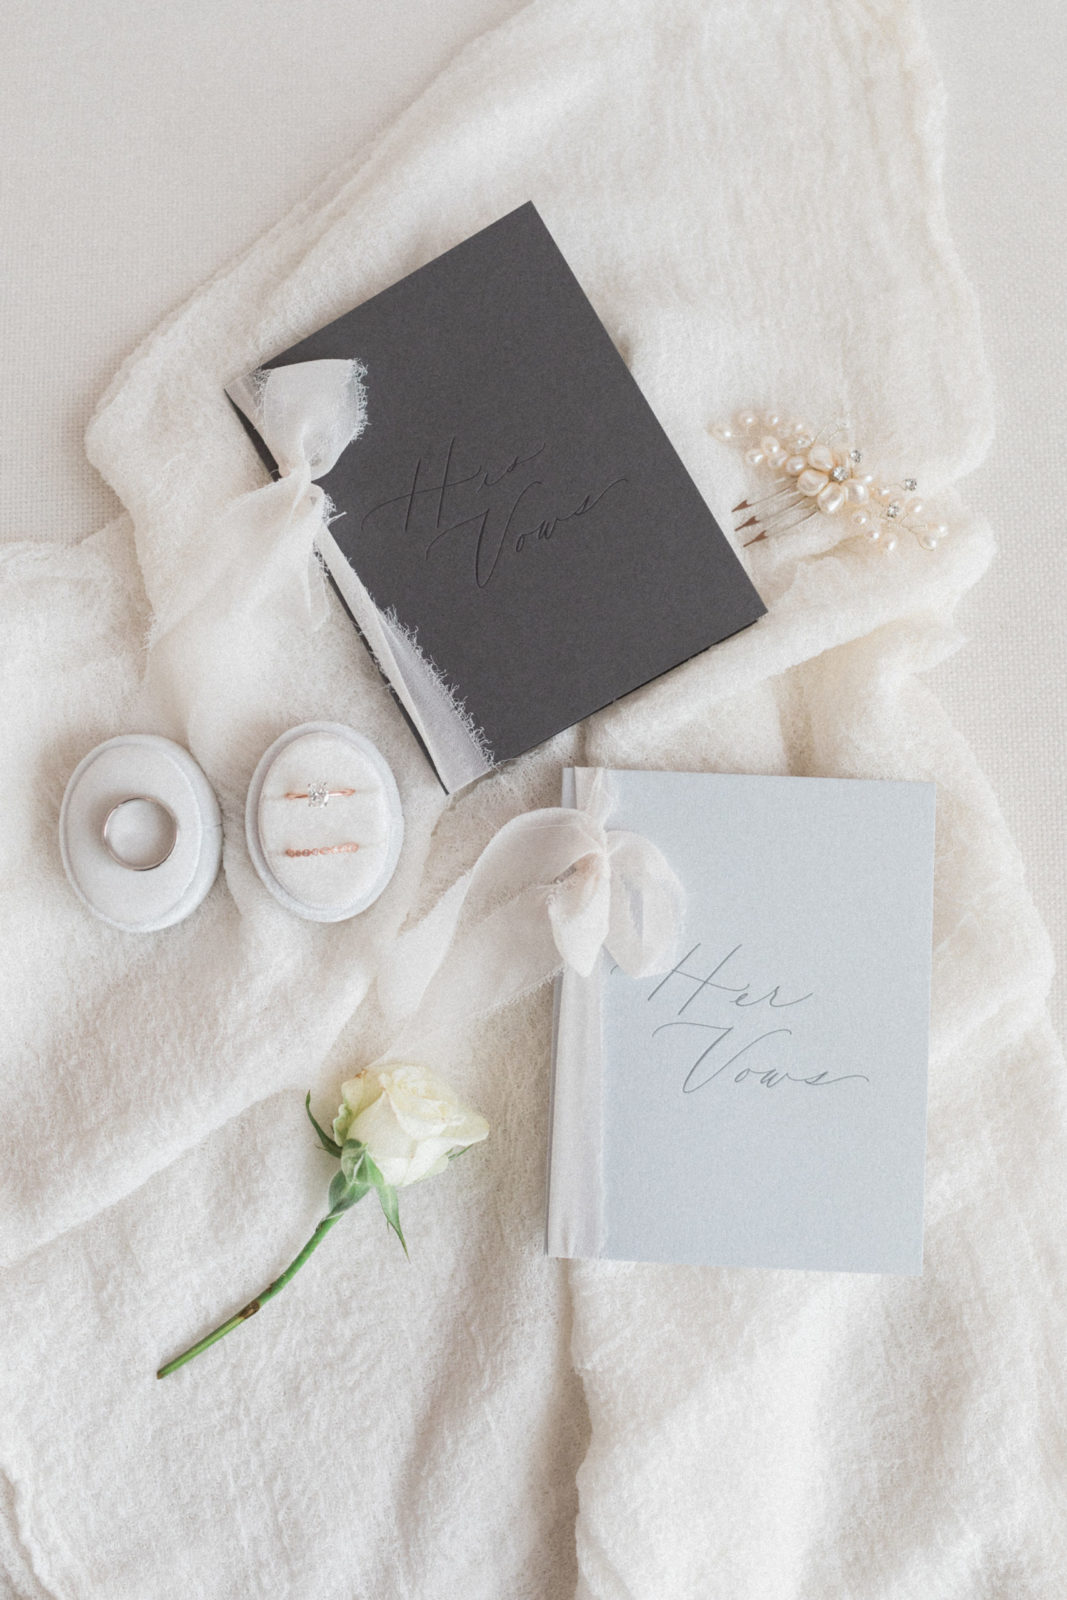 His and her vow books photographed with monochromatic details